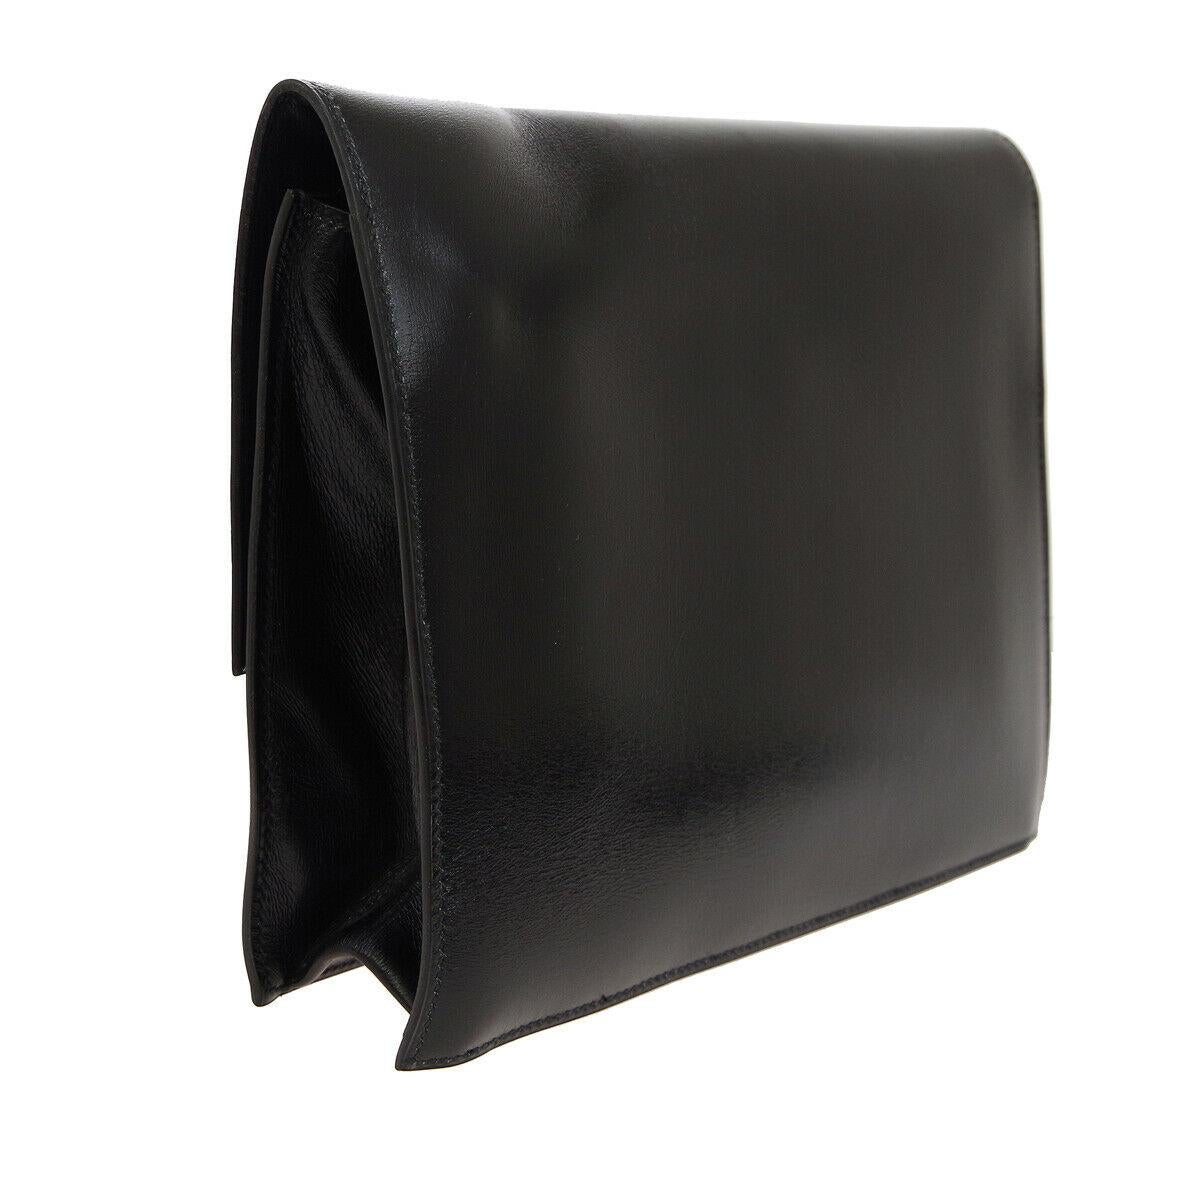 Hermes Black Leather Fold In Buckle Envelope Evening Flap Clutch Bag

Leather
Fold in closure
Leather lining
Date code present
Made in France
Measures 9.25